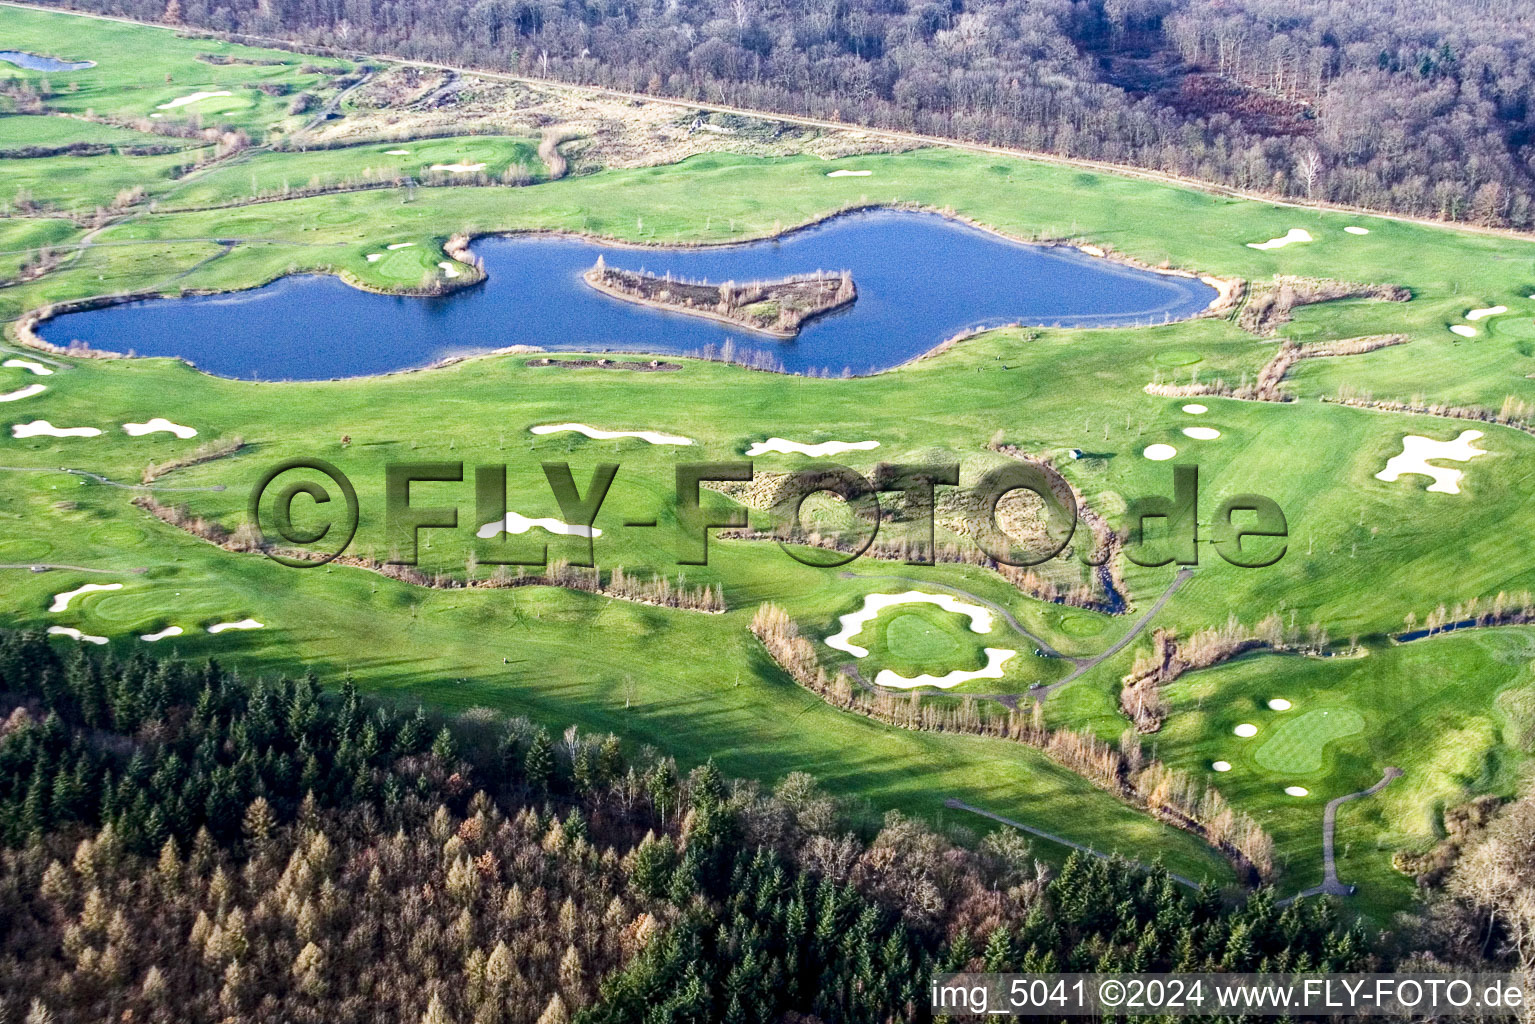 Grounds of the Golf course at Golfanlage Landgut Dreihof in Essingen in the state Rhineland-Palatinate seen from above